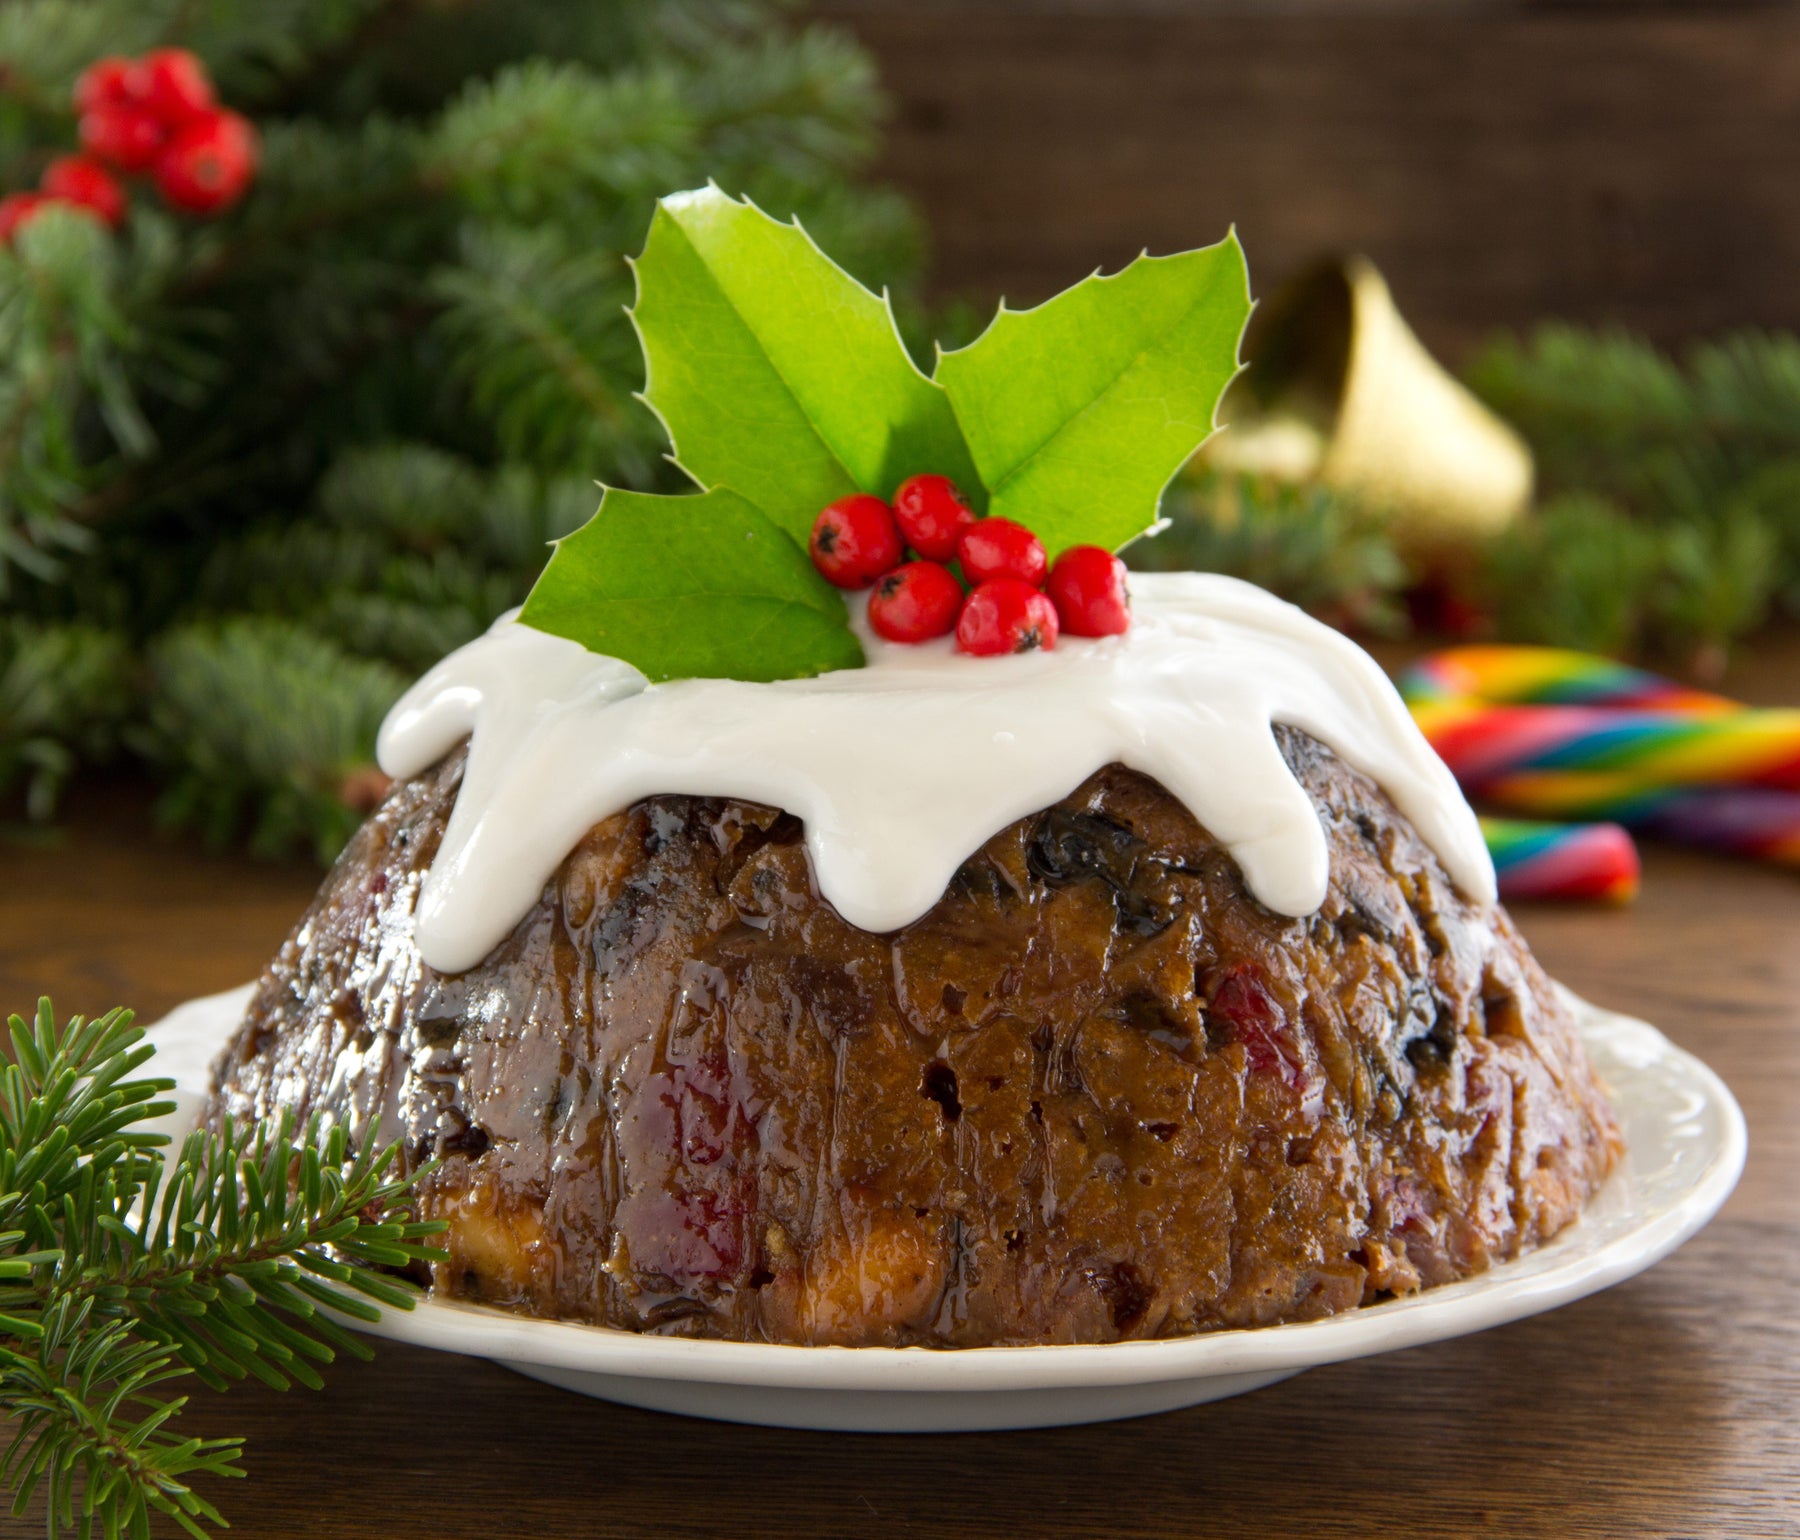 A holiday tradition for some, a new adventure for others - the Holiday Pudding!